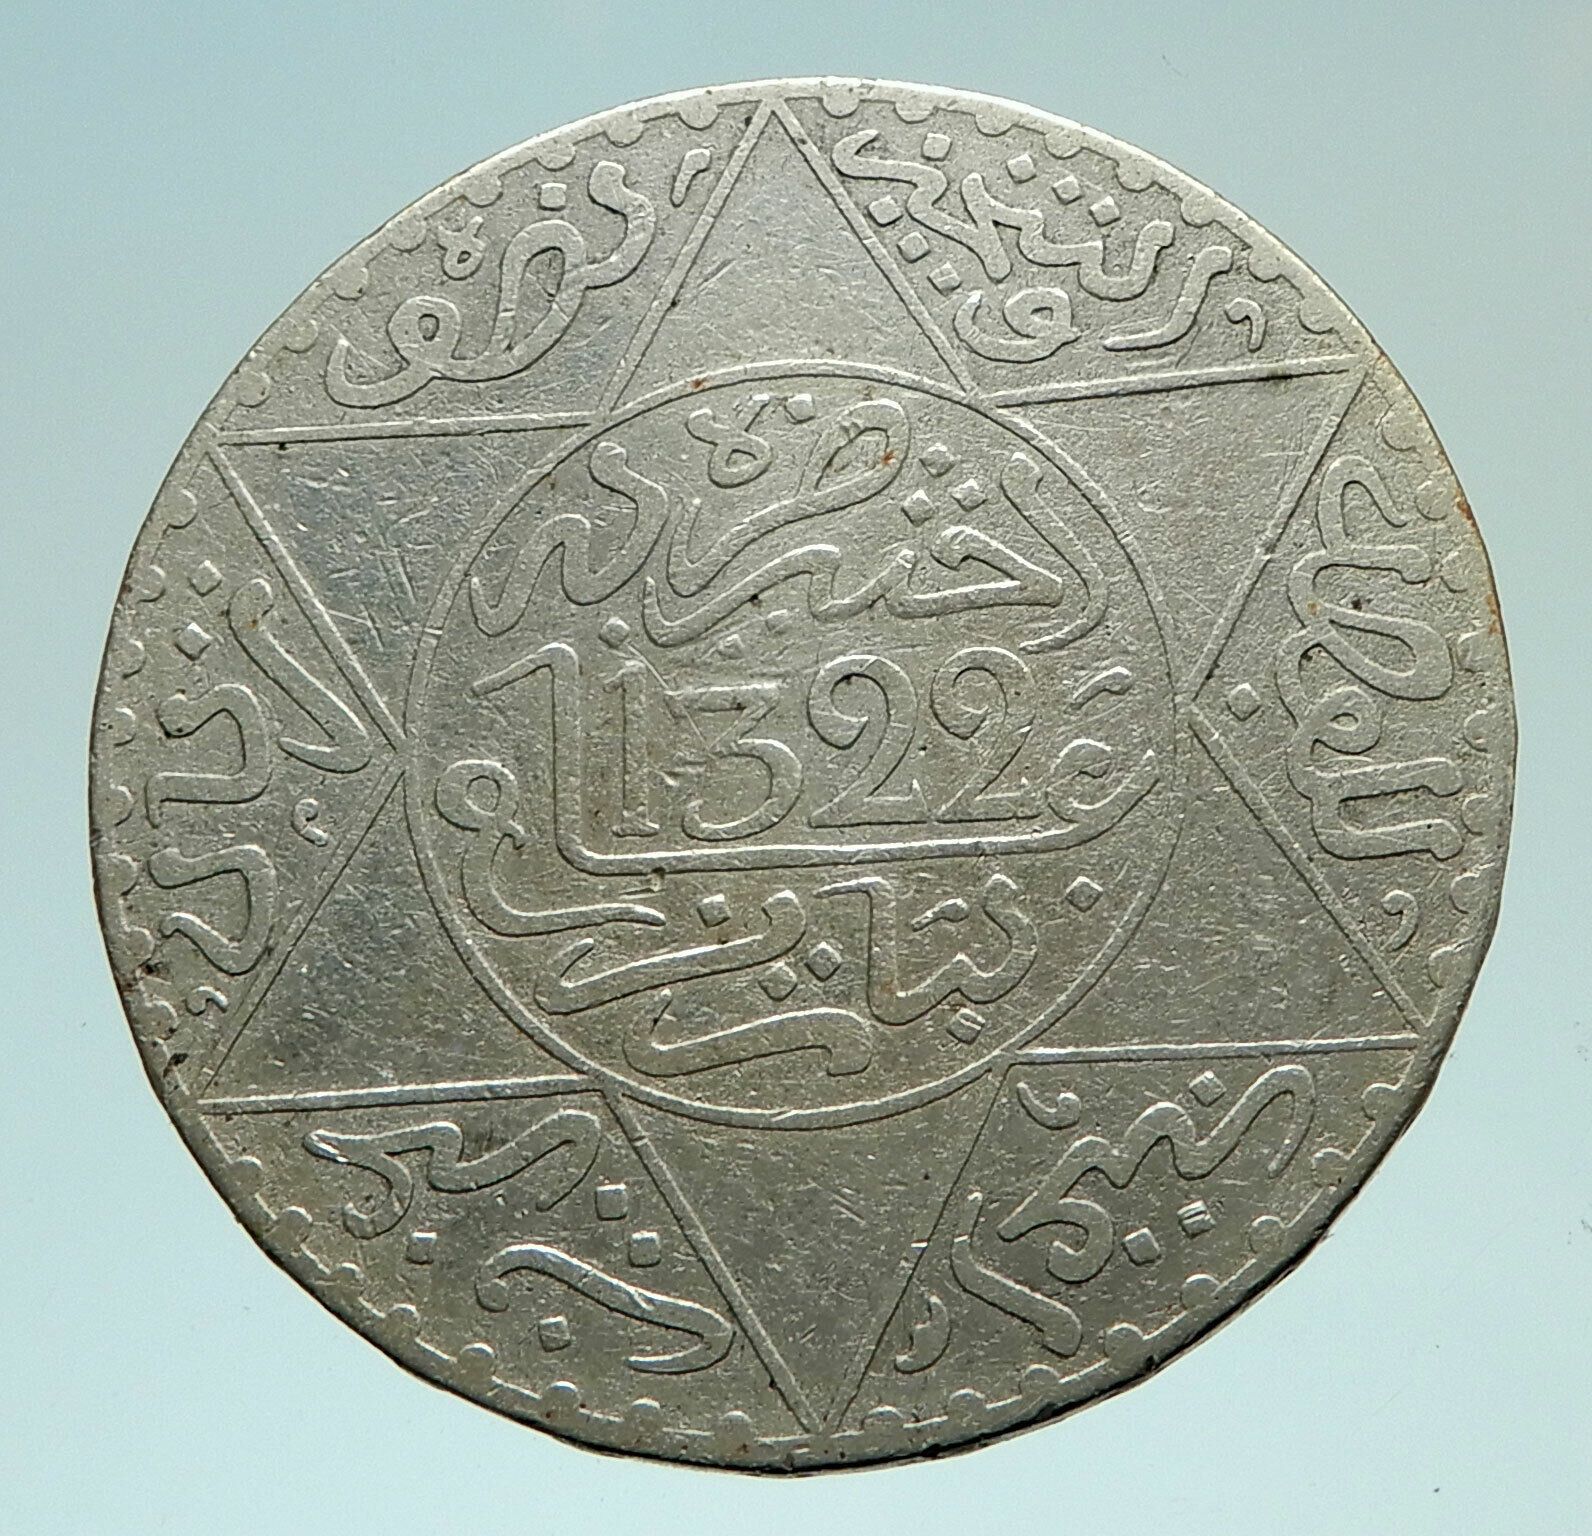 1904 or 1322AH MOROCCO with Star of David Genuine Silver 1/2 Rial Coin i76020